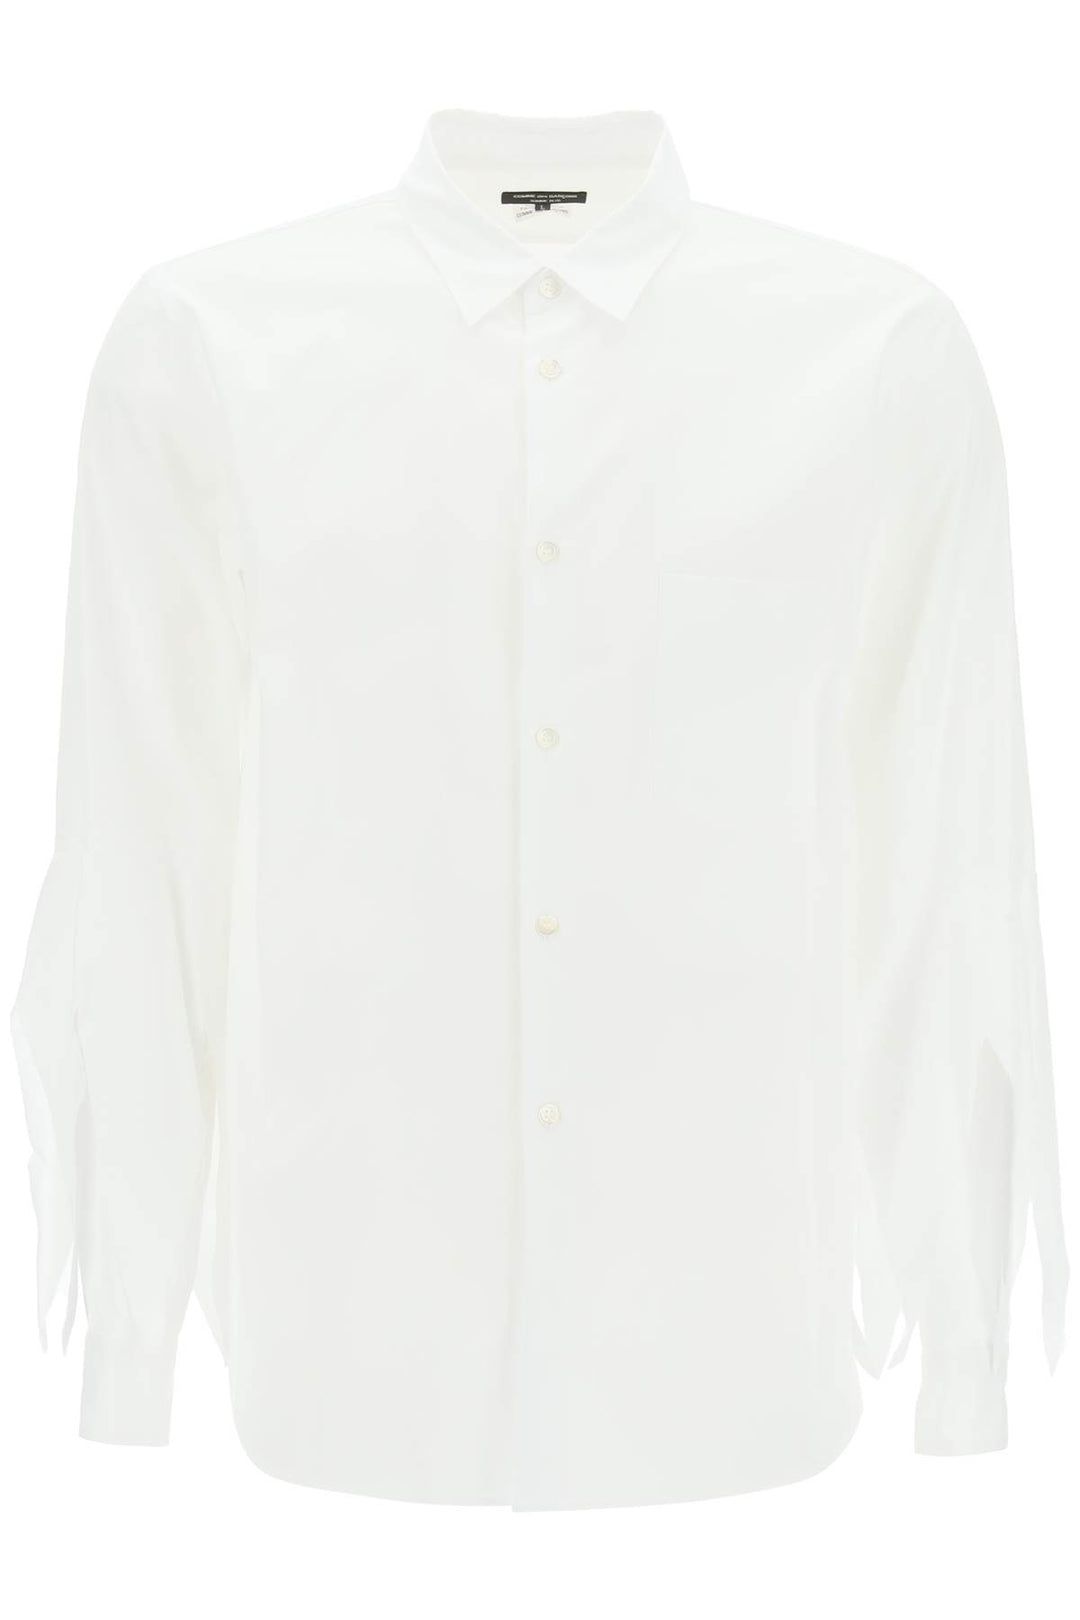 Comme des garcons homme plus spiked frayed-sleeved shirt-0